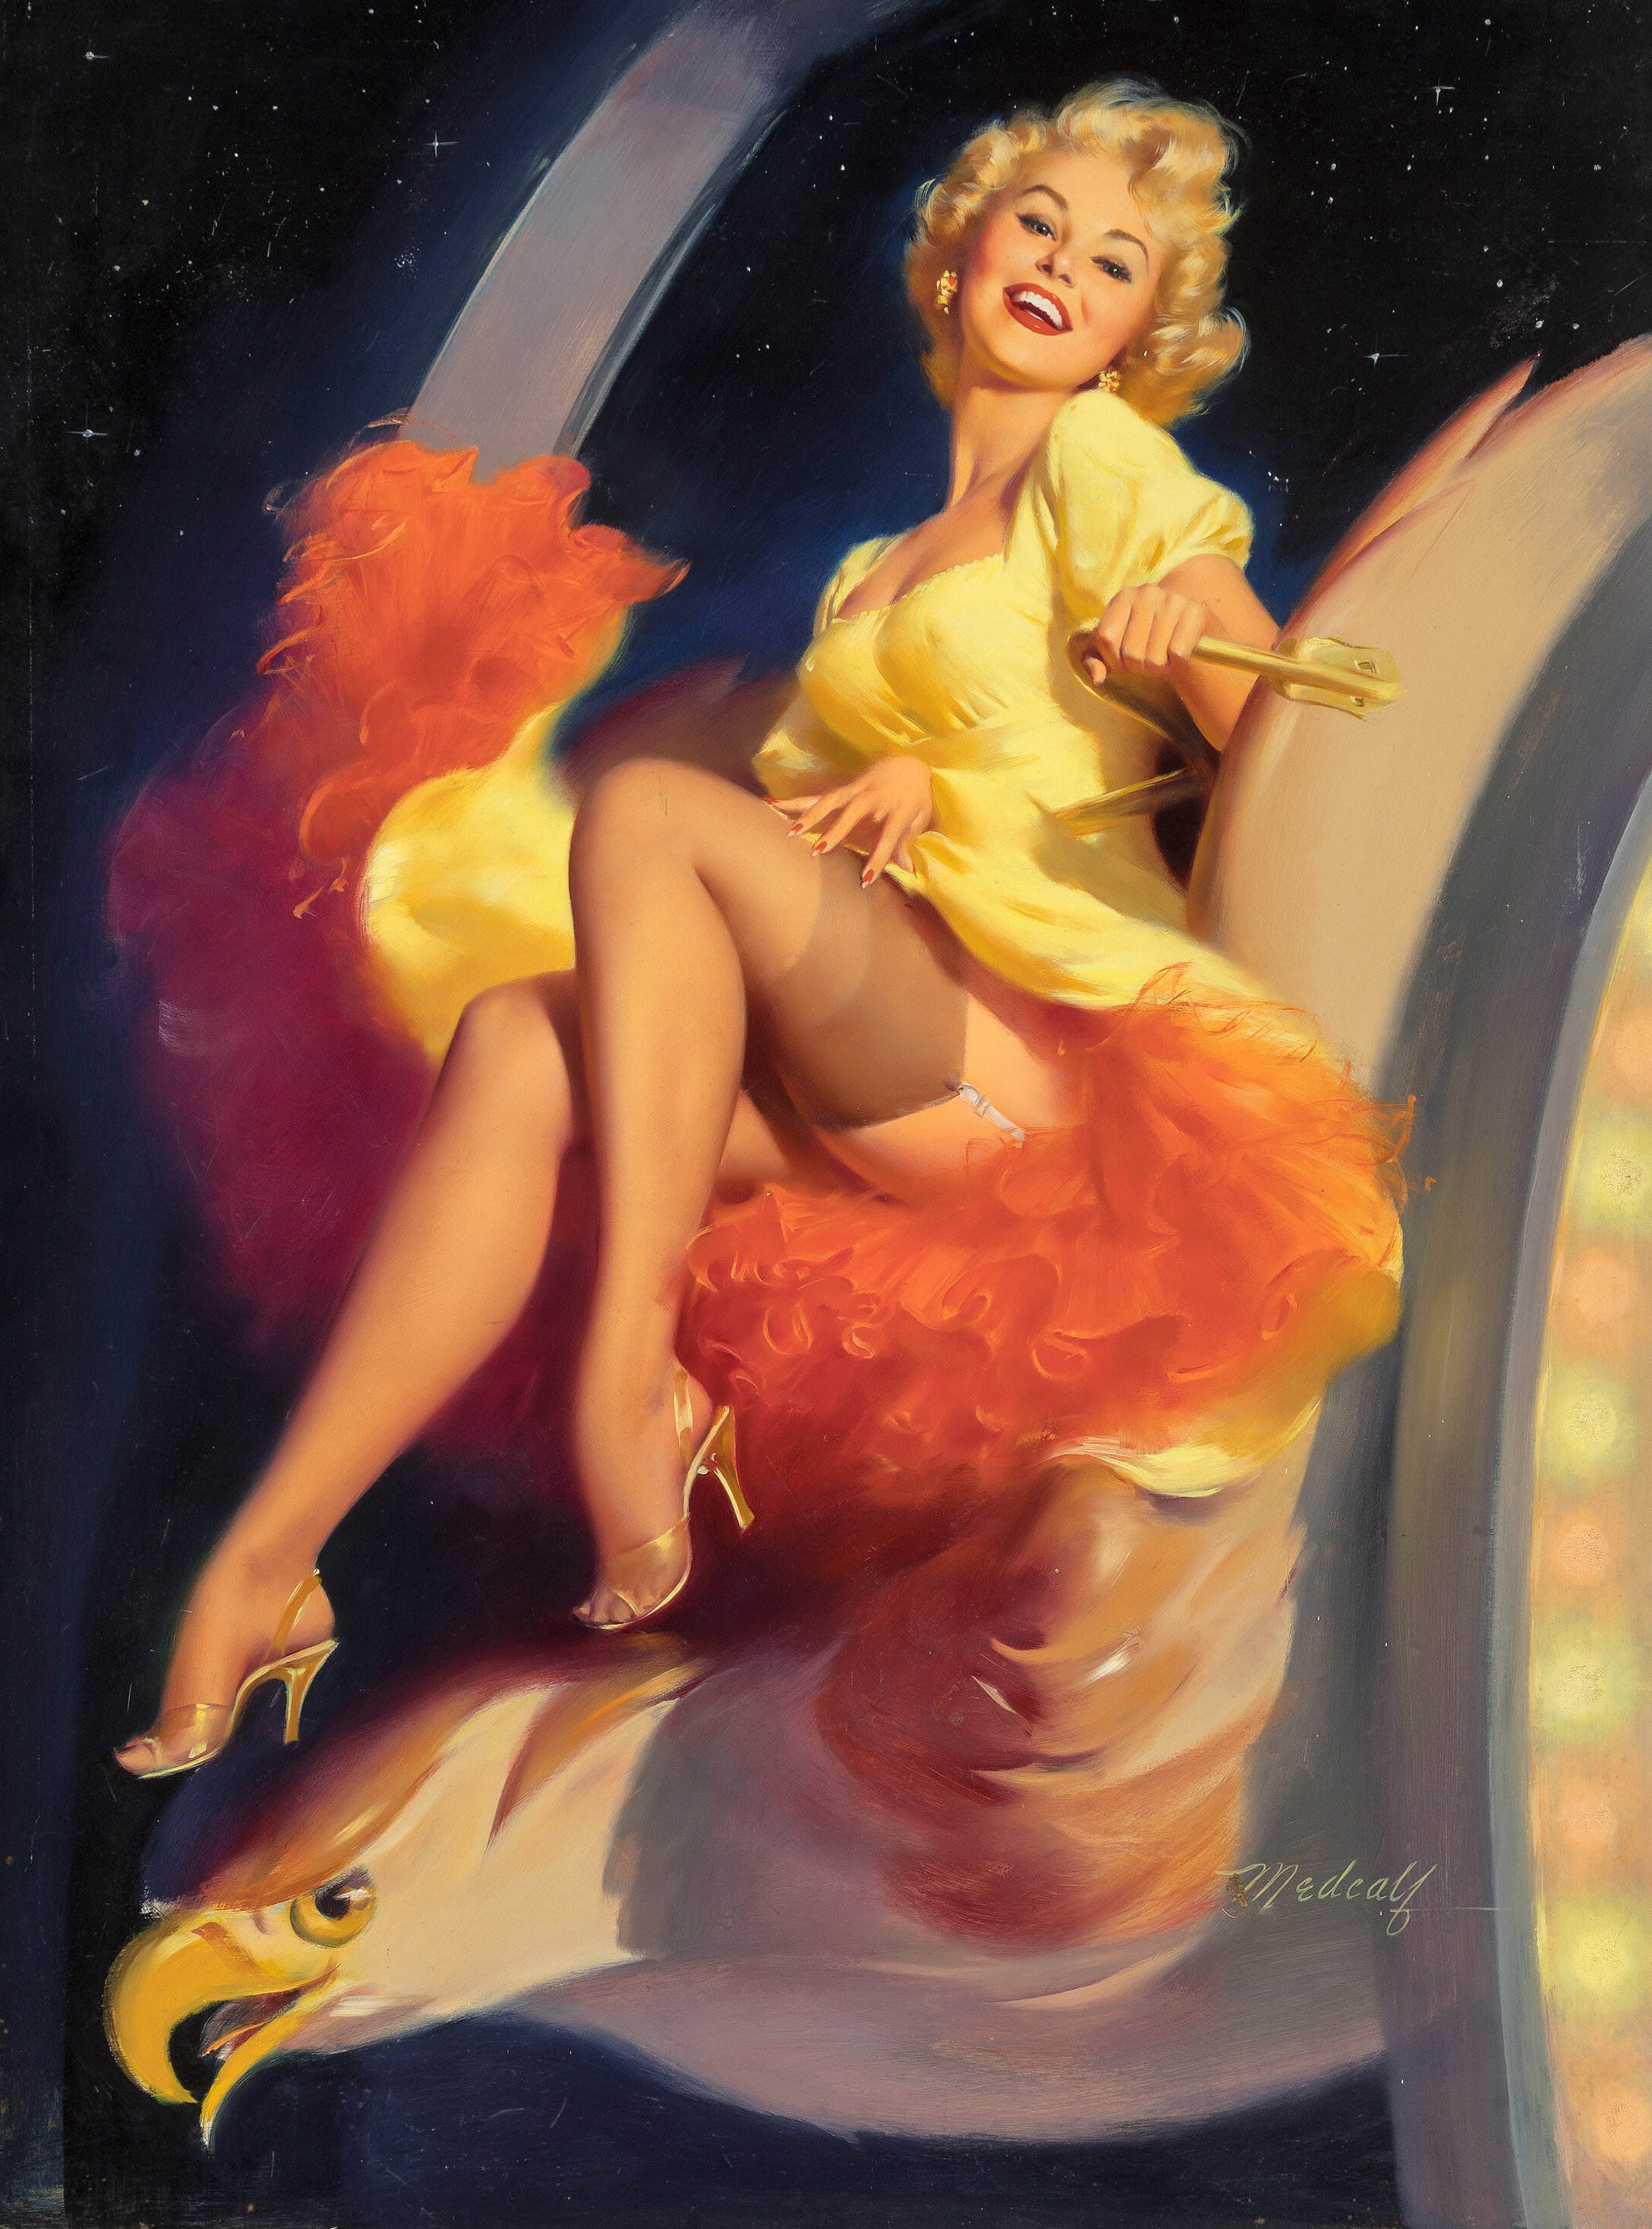 General 2160x2914 painting William Medcaf eagle stockings blonde pinup models vintage portrait display signature smiling looking at viewer animals stars heels dress